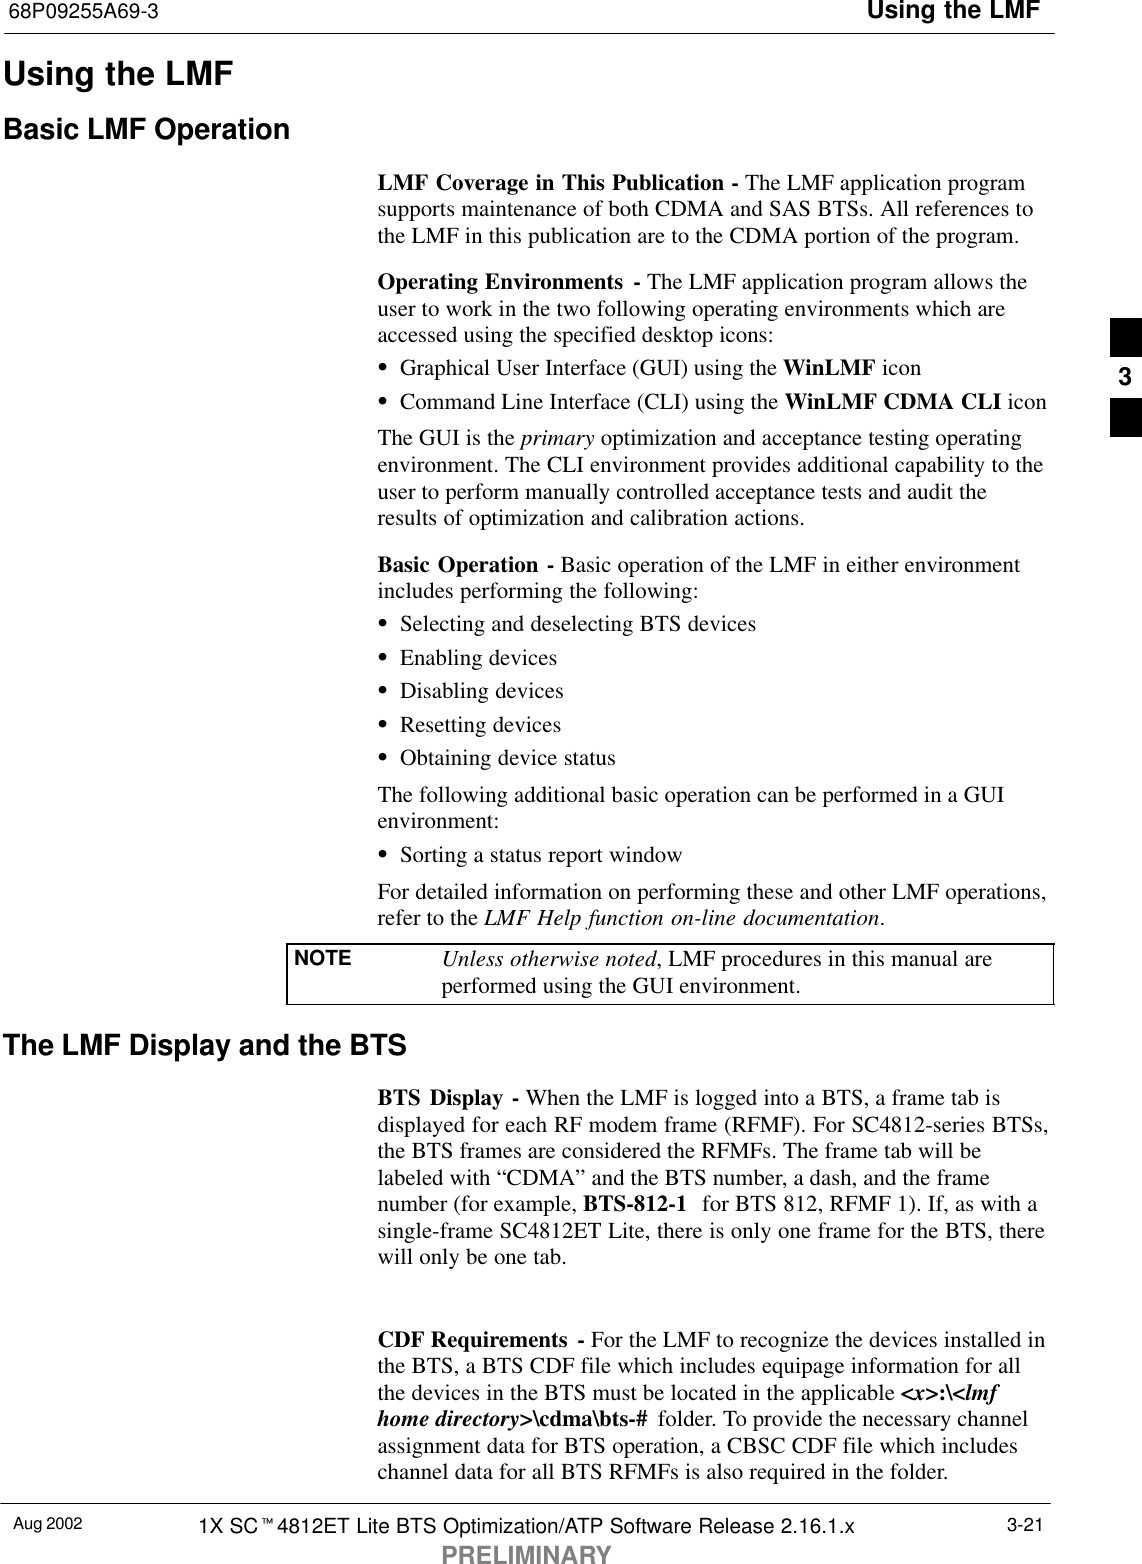 Using the LMF68P09255A69-3Aug 2002 1X SCt4812ET Lite BTS Optimization/ATP Software Release 2.16.1.xPRELIMINARY3-21Using the LMFBasic LMF OperationLMF Coverage in This Publication - The LMF application programsupports maintenance of both CDMA and SAS BTSs. All references tothe LMF in this publication are to the CDMA portion of the program.Operating Environments - The LMF application program allows theuser to work in the two following operating environments which areaccessed using the specified desktop icons:SGraphical User Interface (GUI) using the WinLMF iconSCommand Line Interface (CLI) using the WinLMF CDMA CLI iconThe GUI is the primary optimization and acceptance testing operatingenvironment. The CLI environment provides additional capability to theuser to perform manually controlled acceptance tests and audit theresults of optimization and calibration actions.Basic Operation - Basic operation of the LMF in either environmentincludes performing the following:SSelecting and deselecting BTS devicesSEnabling devicesSDisabling devicesSResetting devicesSObtaining device statusThe following additional basic operation can be performed in a GUIenvironment:SSorting a status report windowFor detailed information on performing these and other LMF operations,refer to the LMF Help function on-line documentation.NOTE Unless otherwise noted, LMF procedures in this manual areperformed using the GUI environment.The LMF Display and the BTSBTS Display - When the LMF is logged into a BTS, a frame tab isdisplayed for each RF modem frame (RFMF). For SC4812-series BTSs,the BTS frames are considered the RFMFs. The frame tab will belabeled with “CDMA” and the BTS number, a dash, and the framenumber (for example, BTS-812-1  for BTS 812, RFMF 1). If, as with asingle-frame SC4812ET Lite, there is only one frame for the BTS, therewill only be one tab.CDF Requirements - For the LMF to recognize the devices installed inthe BTS, a BTS CDF file which includes equipage information for allthe devices in the BTS must be located in the applicable &lt;x&gt;:\&lt;lmfhome directory&gt;\cdma\bts-#  folder. To provide the necessary channelassignment data for BTS operation, a CBSC CDF file which includeschannel data for all BTS RFMFs is also required in the folder.3